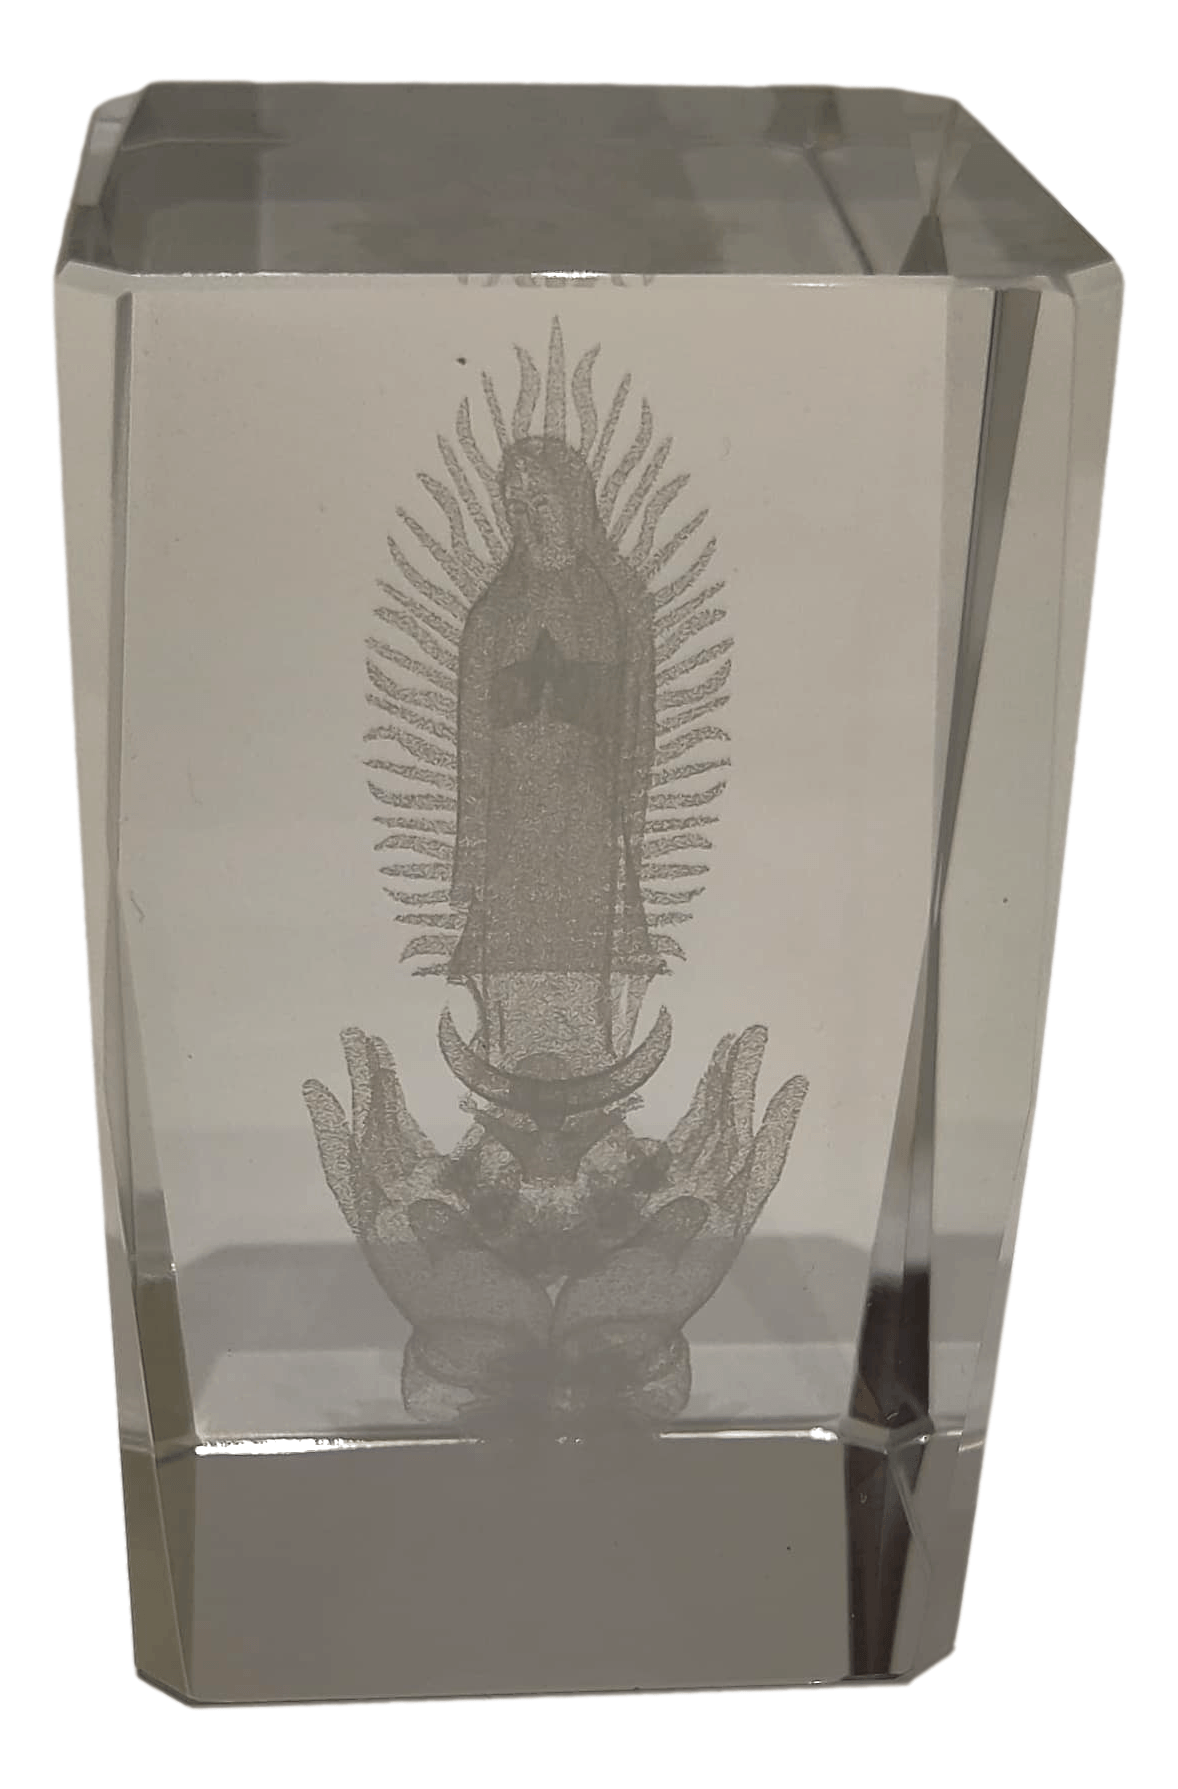 Cube Laser Cut Virgen De Guadalupe TabletopCrystal ClearW:2inches X H: 3 inches - Ysleta Mission Gift Shop- VOTED El Paso's Best Gift Shop